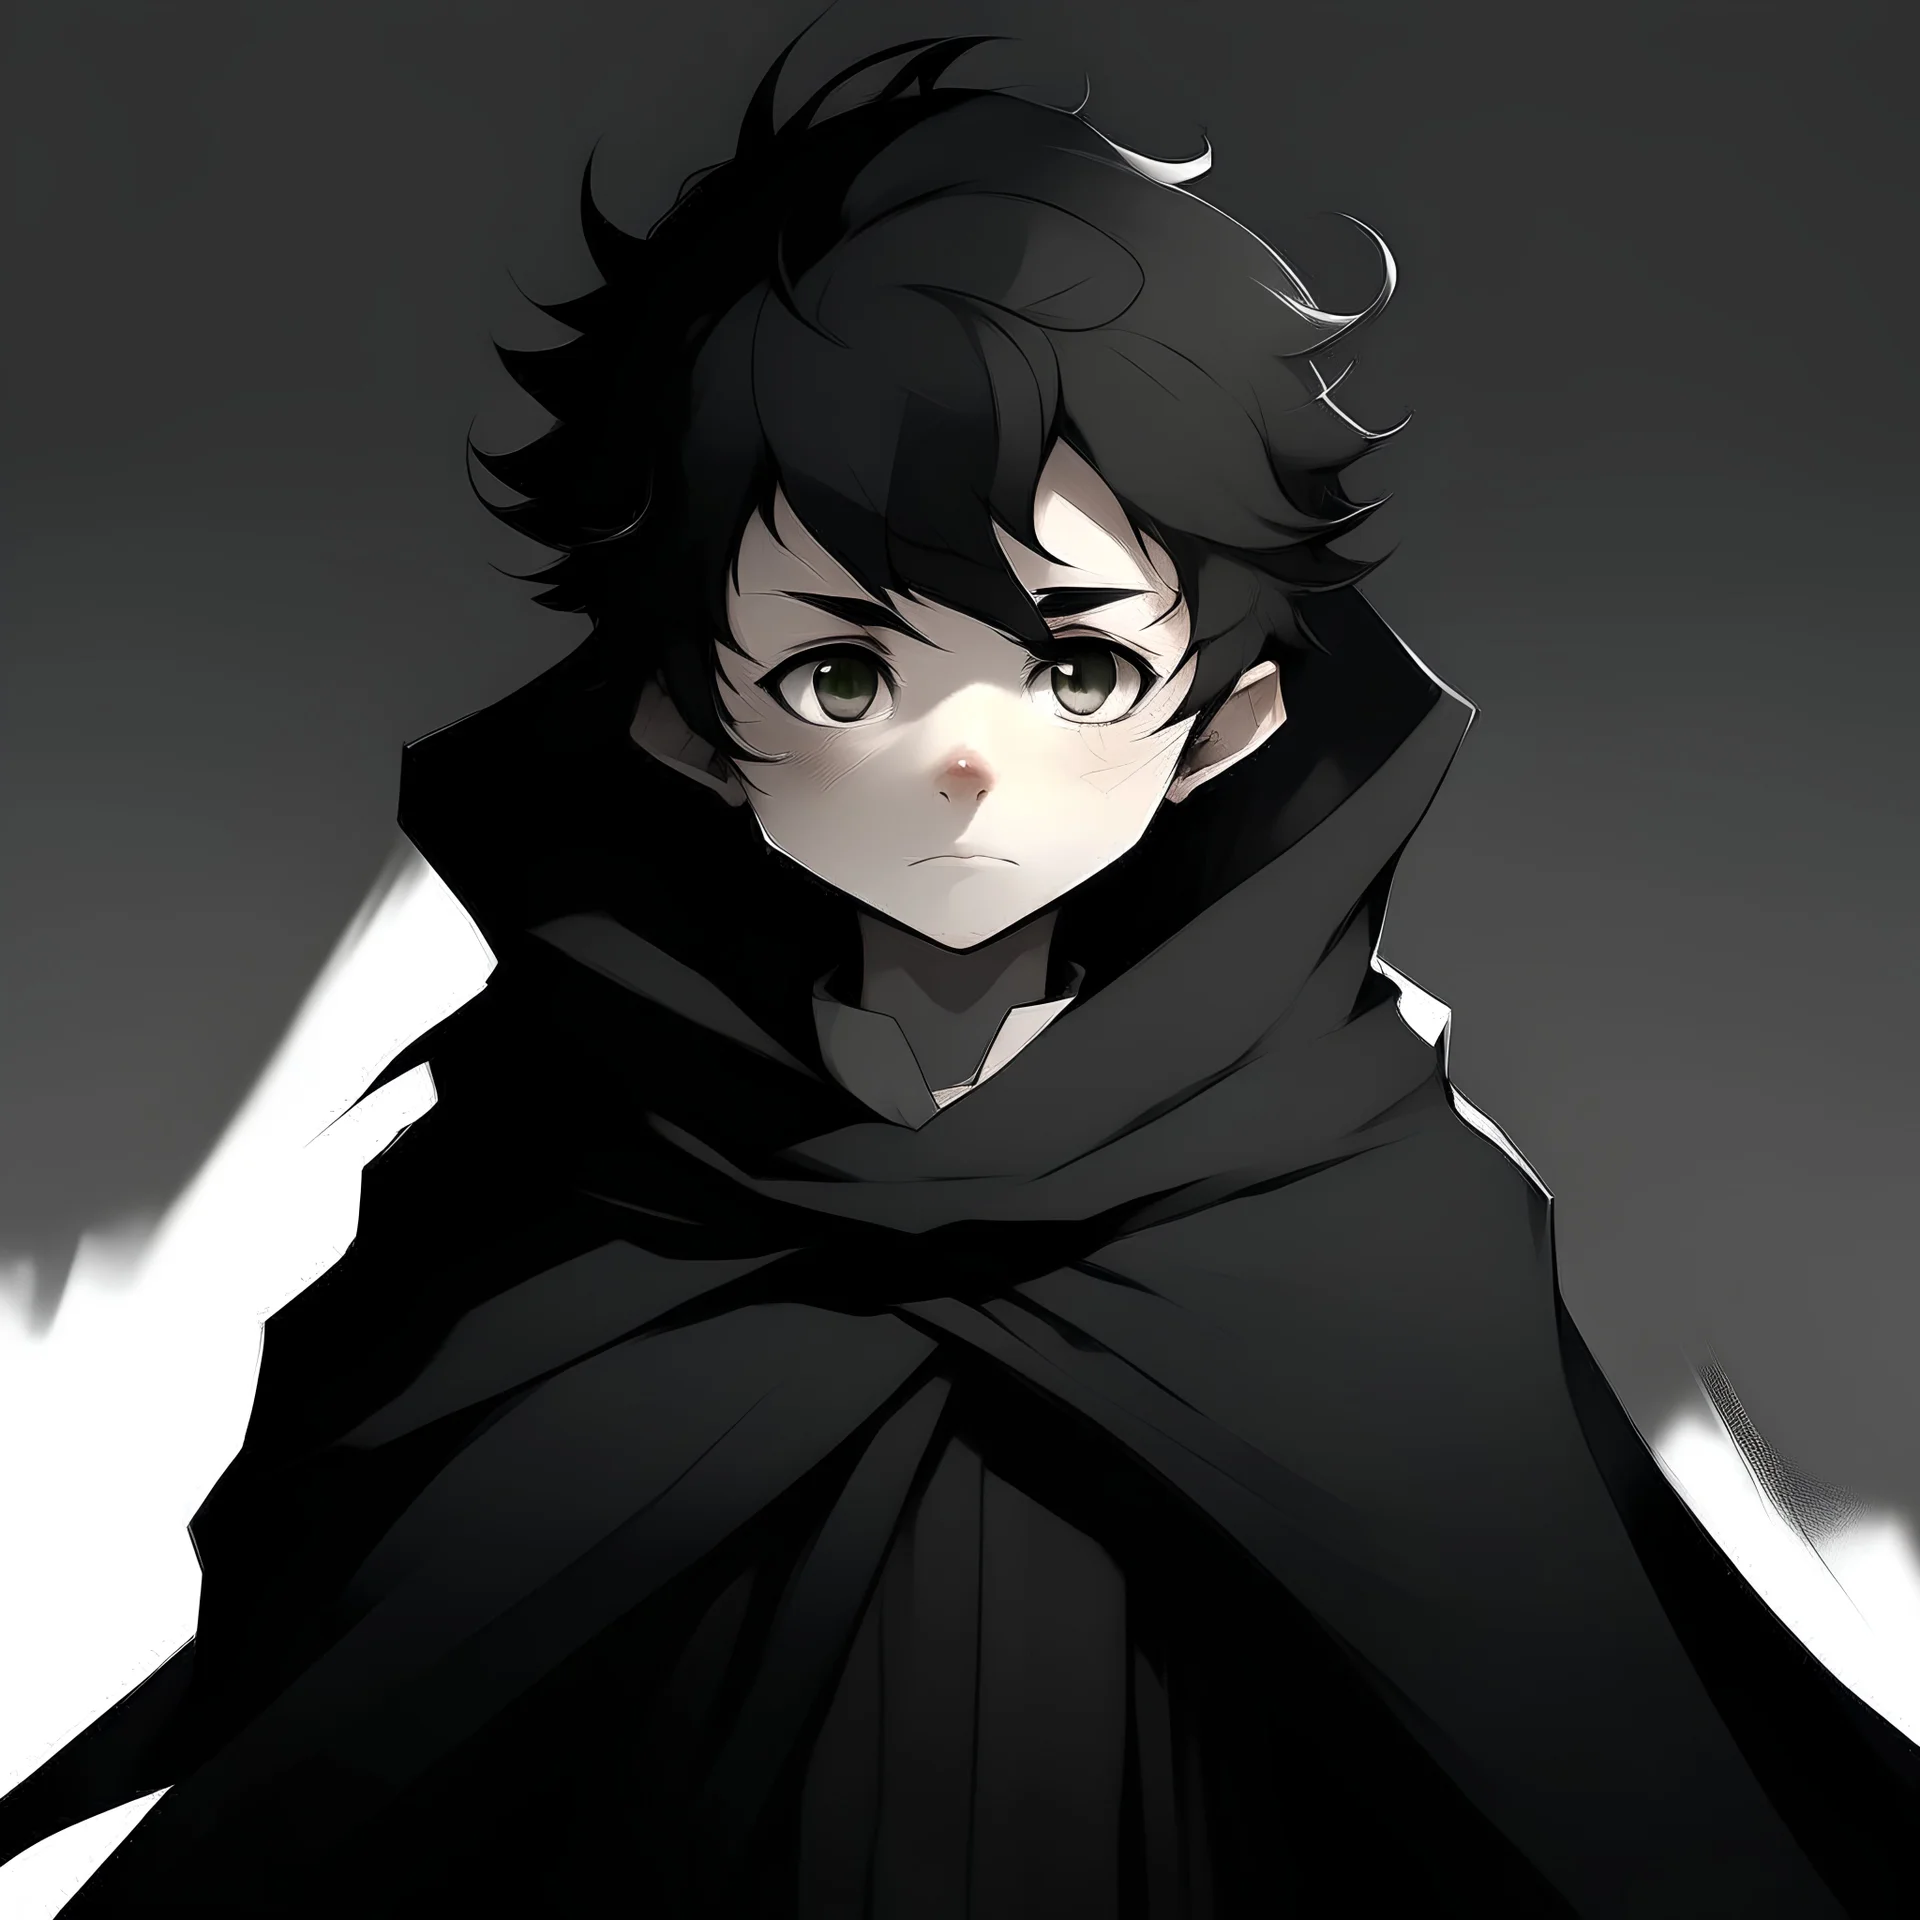 Animated boy with white skin, short and messy hair that is black with white streaks through it, wearing black cloak